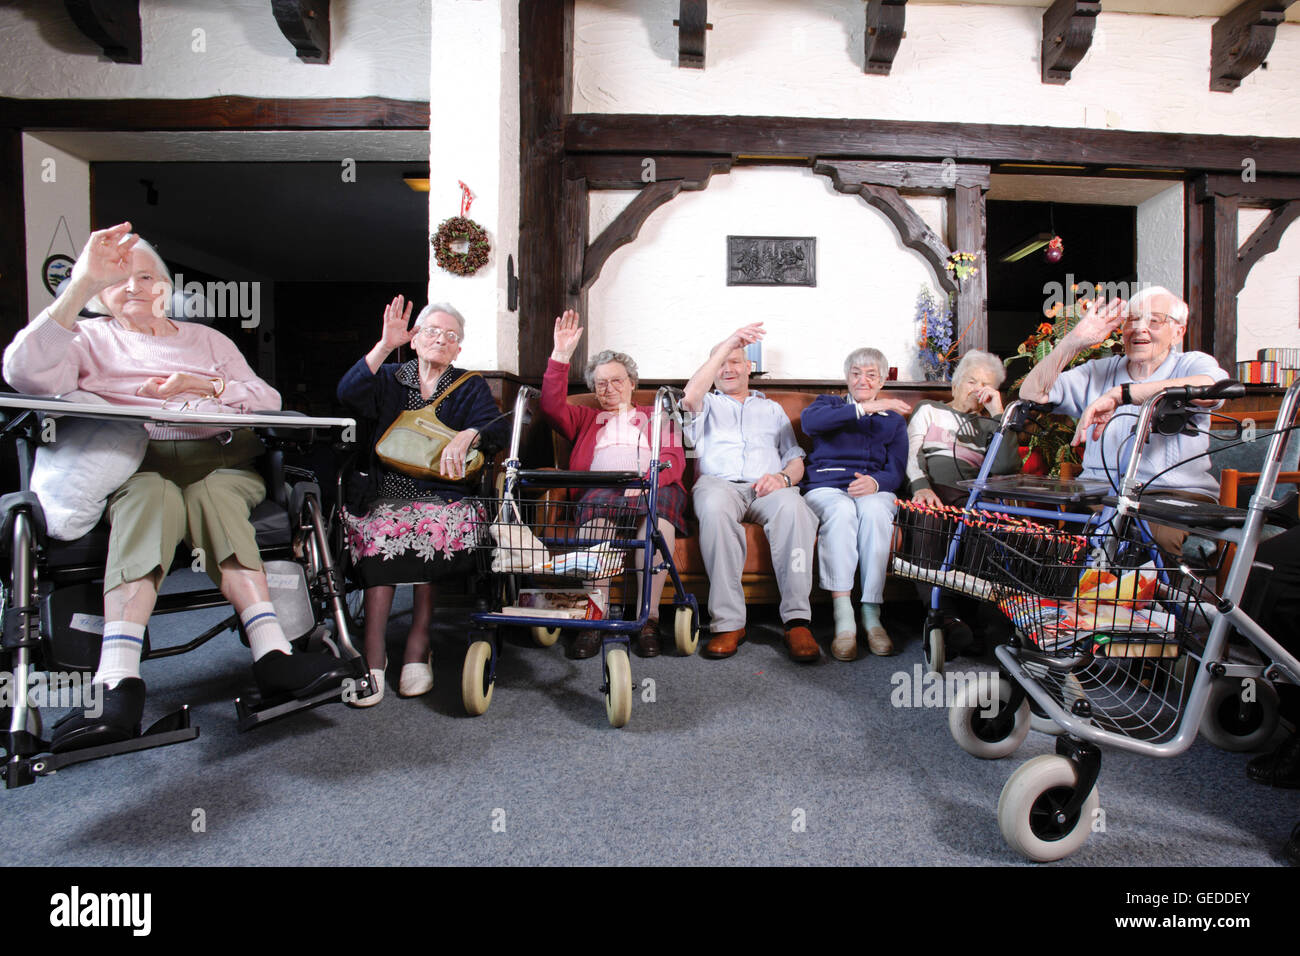 Residents in the common room of a nursing home Stock Photo